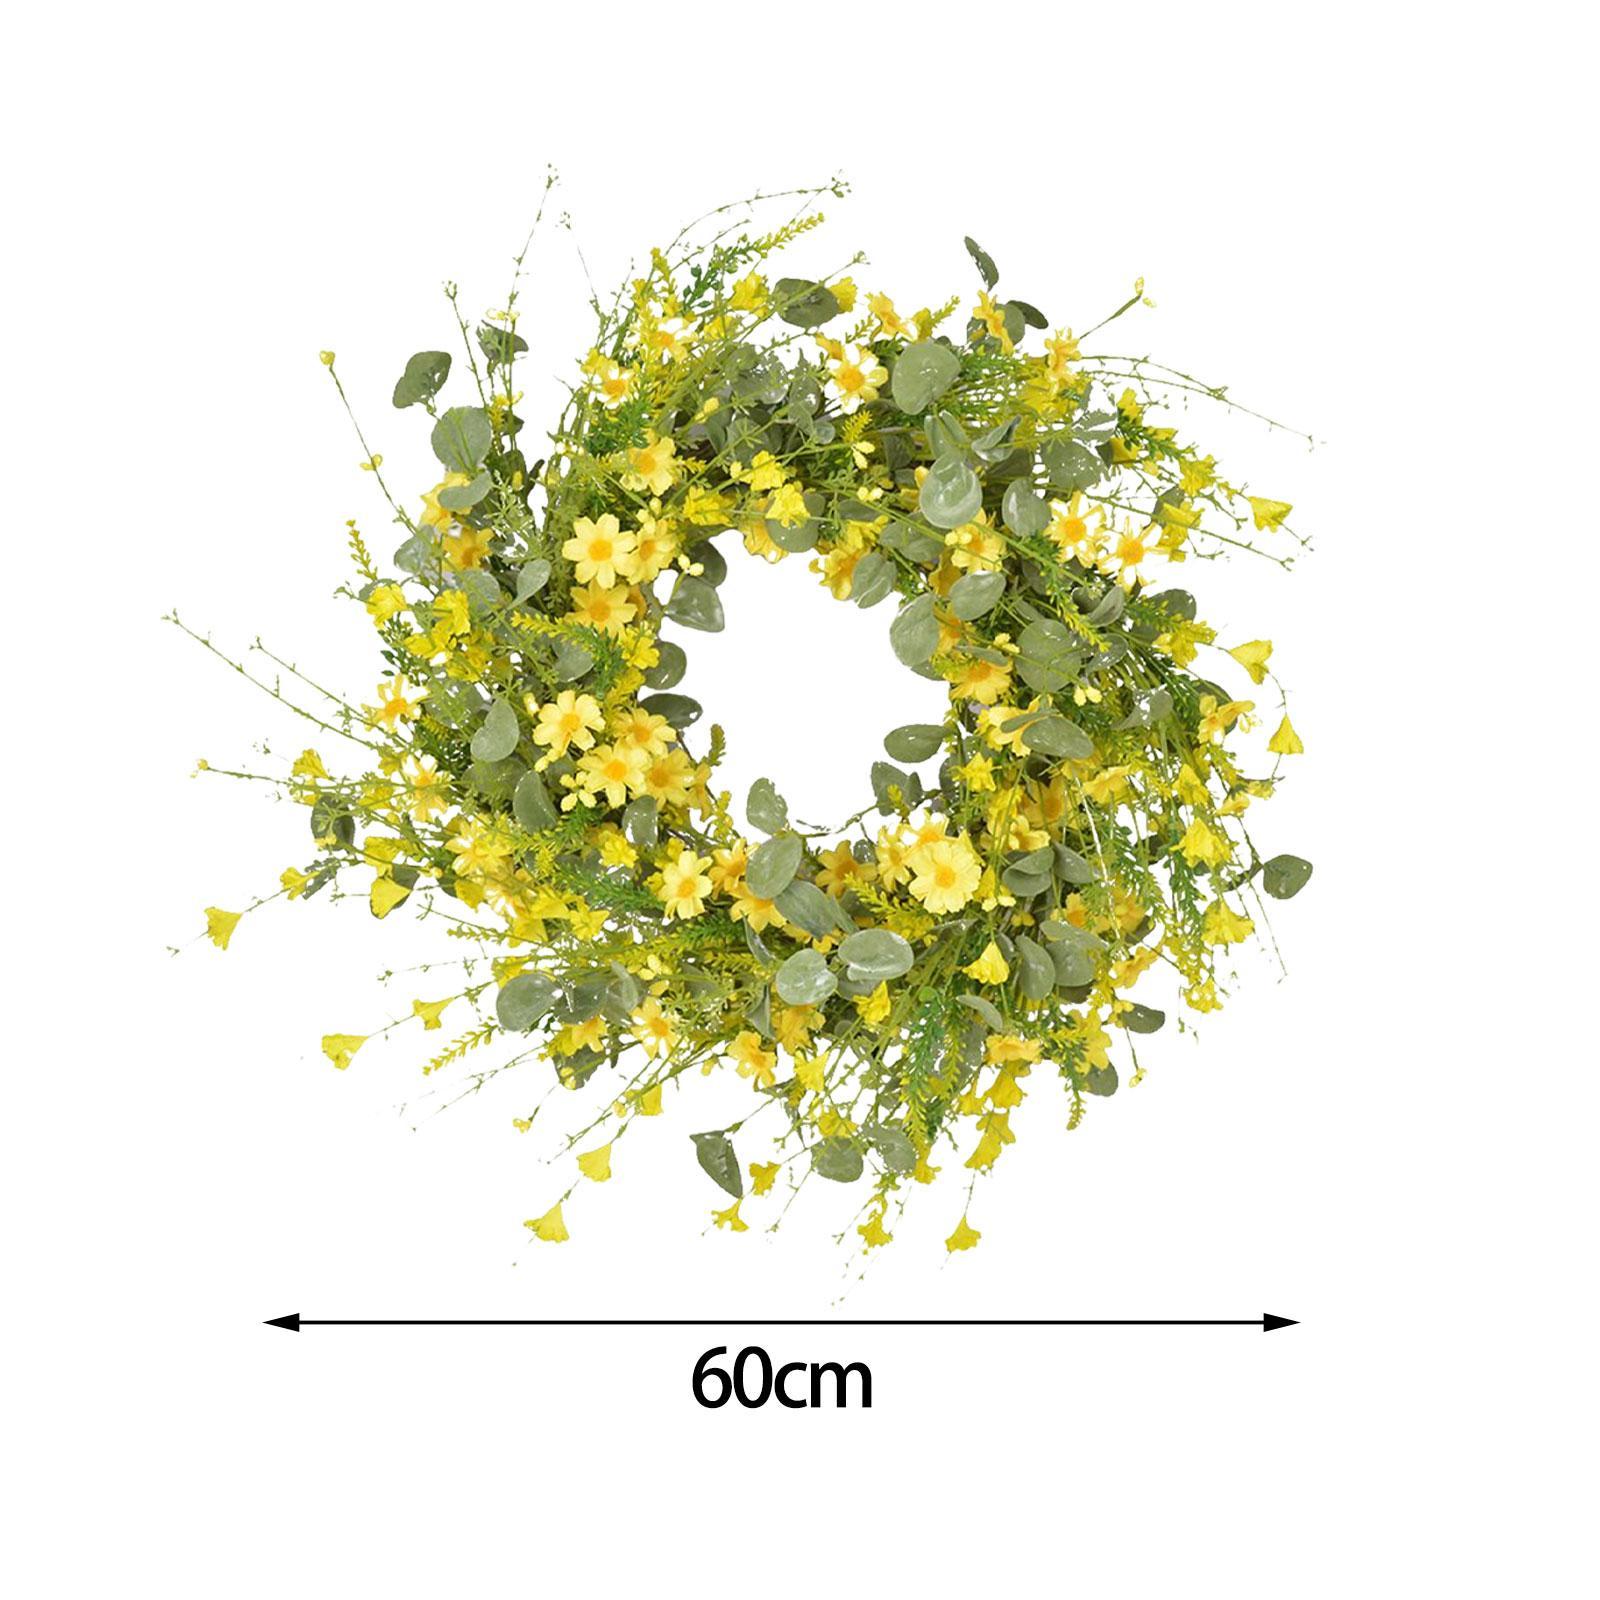 Artificial Daisy Eucalyptus Wreath, Front Door Hanging Floral Simulated Flower Wreath for Festival Holidays Window Home Decor Patio